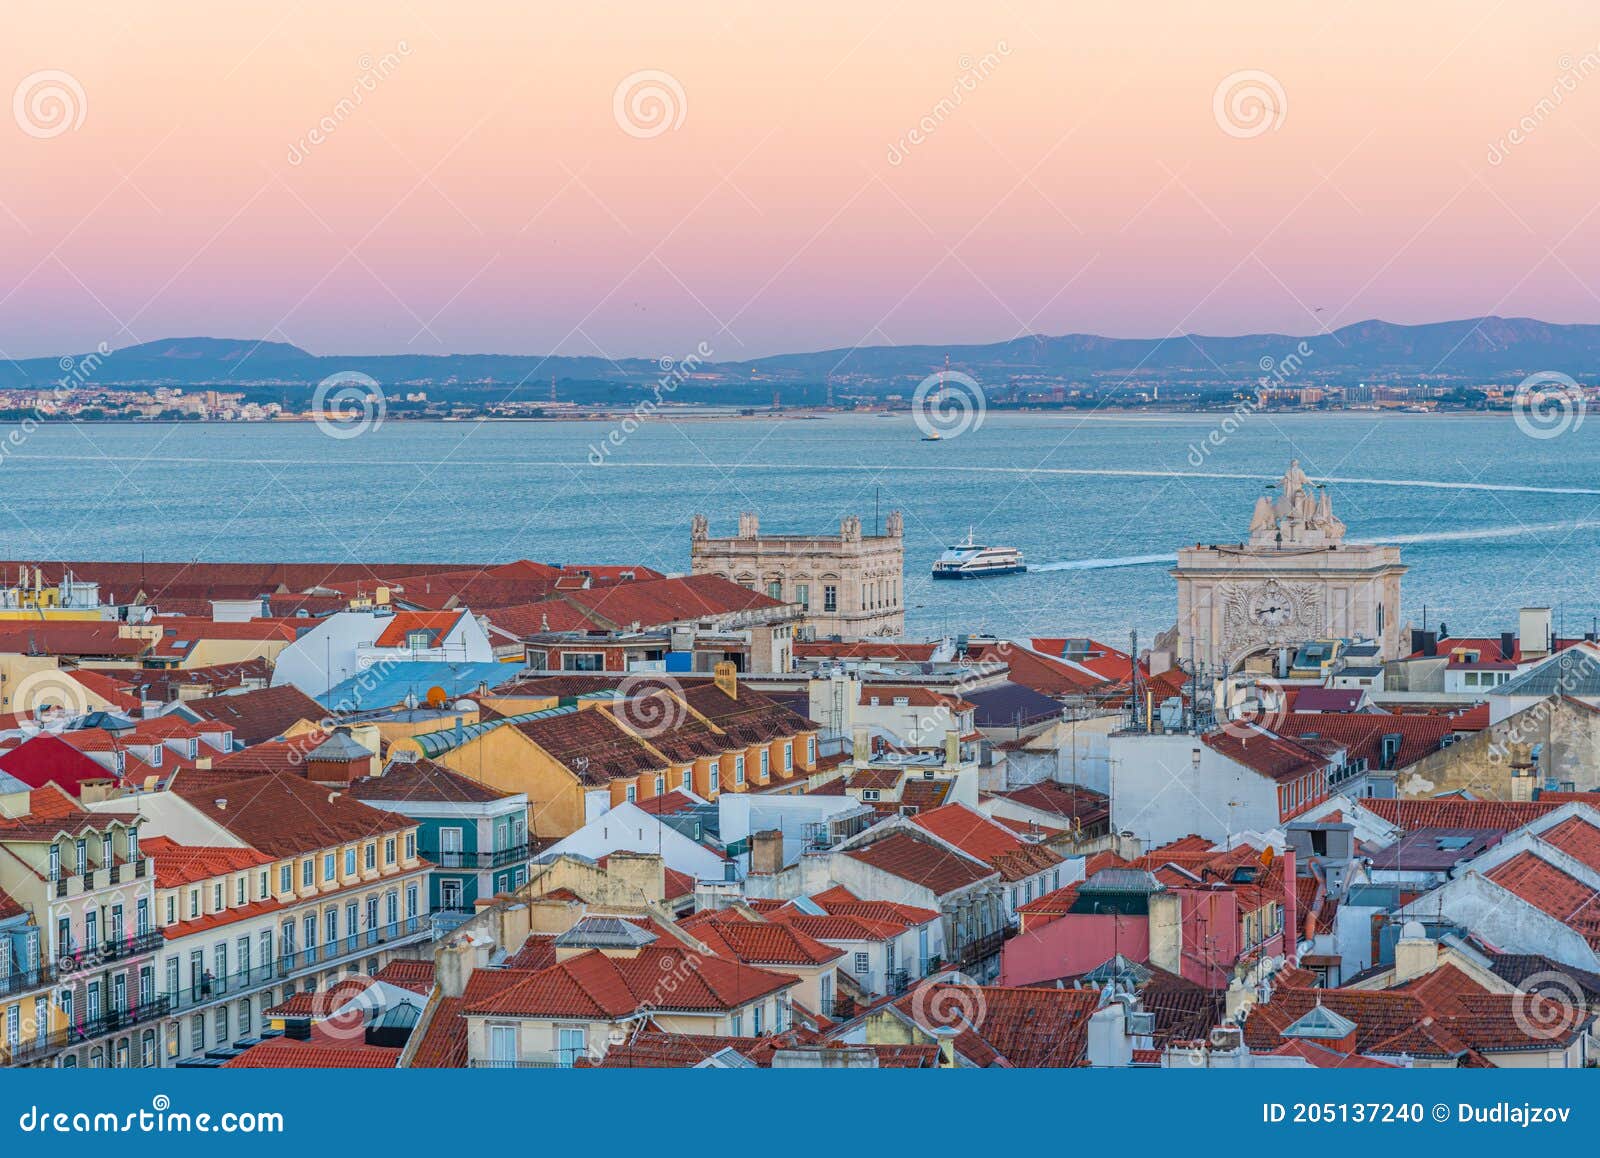 sunset view of the old town and praca do commercio in lisbon, portugal